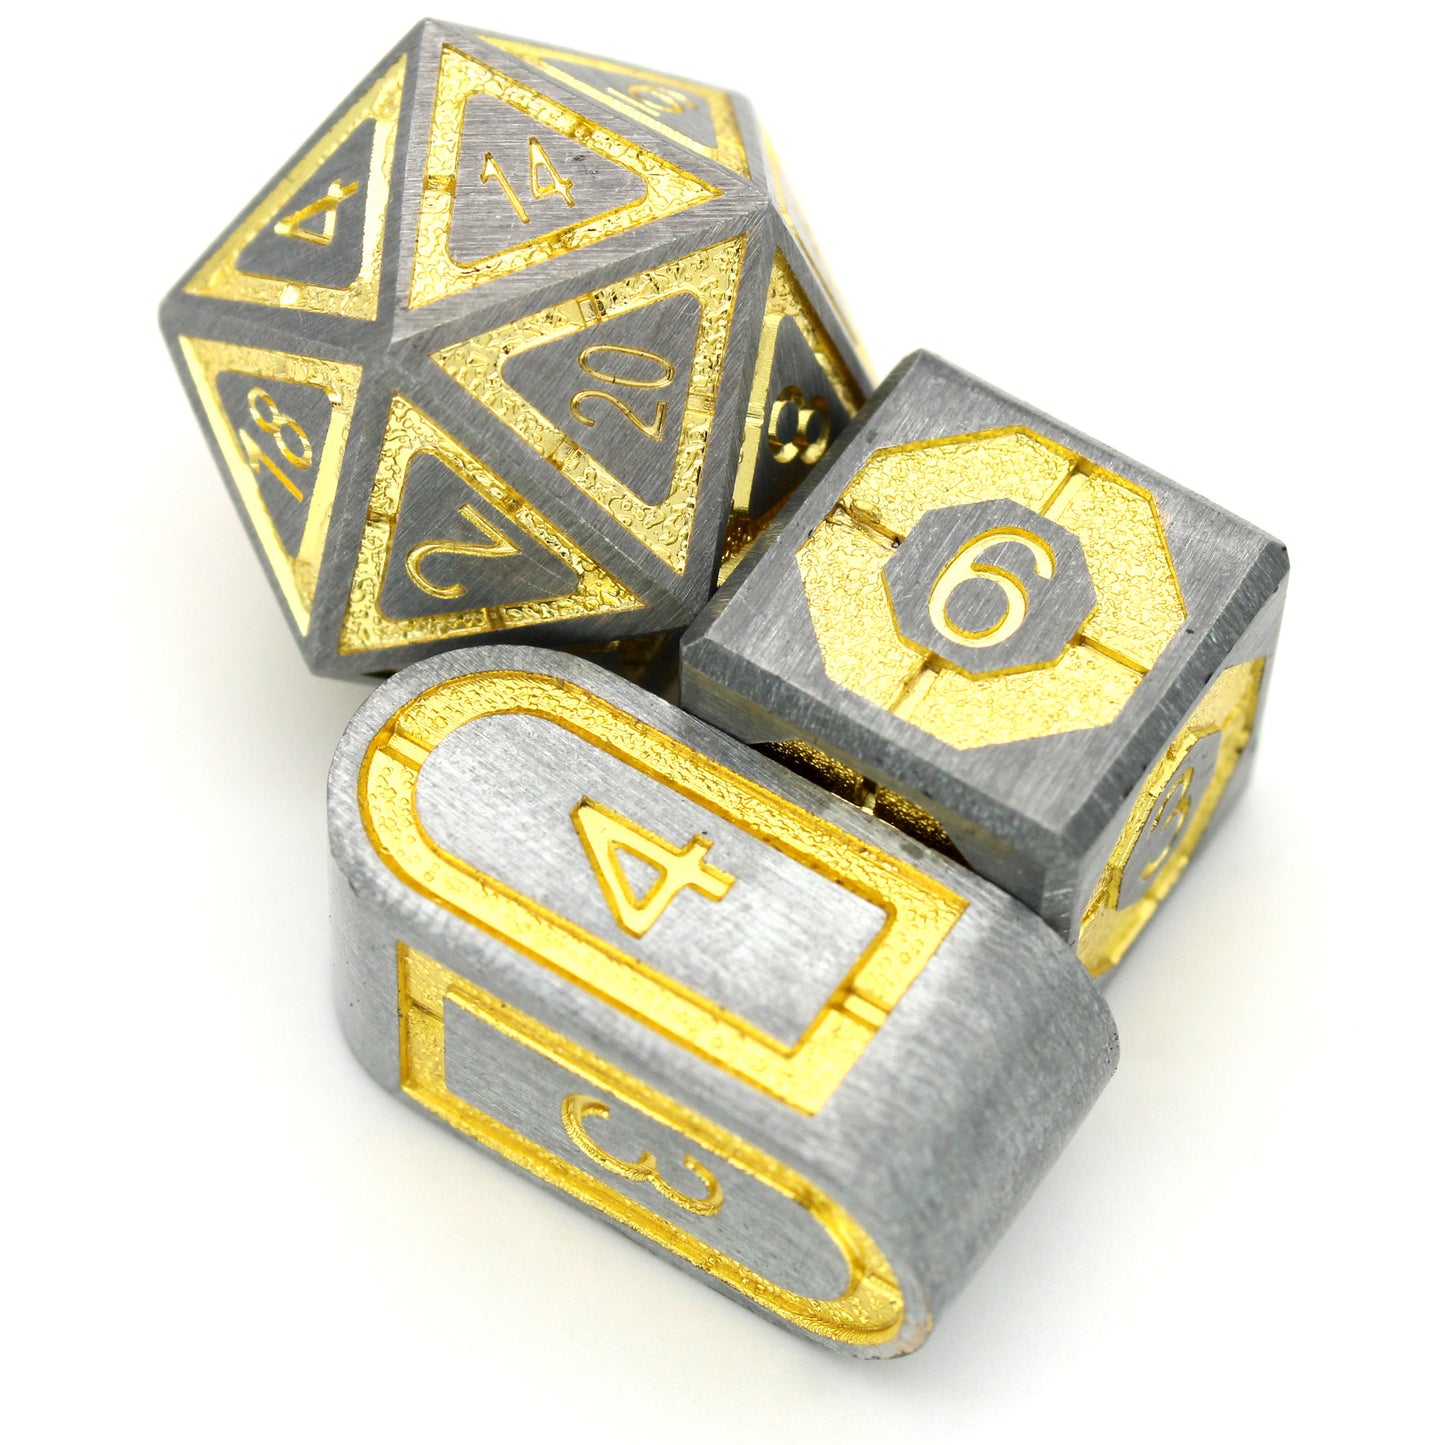 Ore Core is an 8-piece metal set featuring geometric channels of textured golden yellow enamel running through a frosted steel frame. Perfect for your next sci-fi campaign!